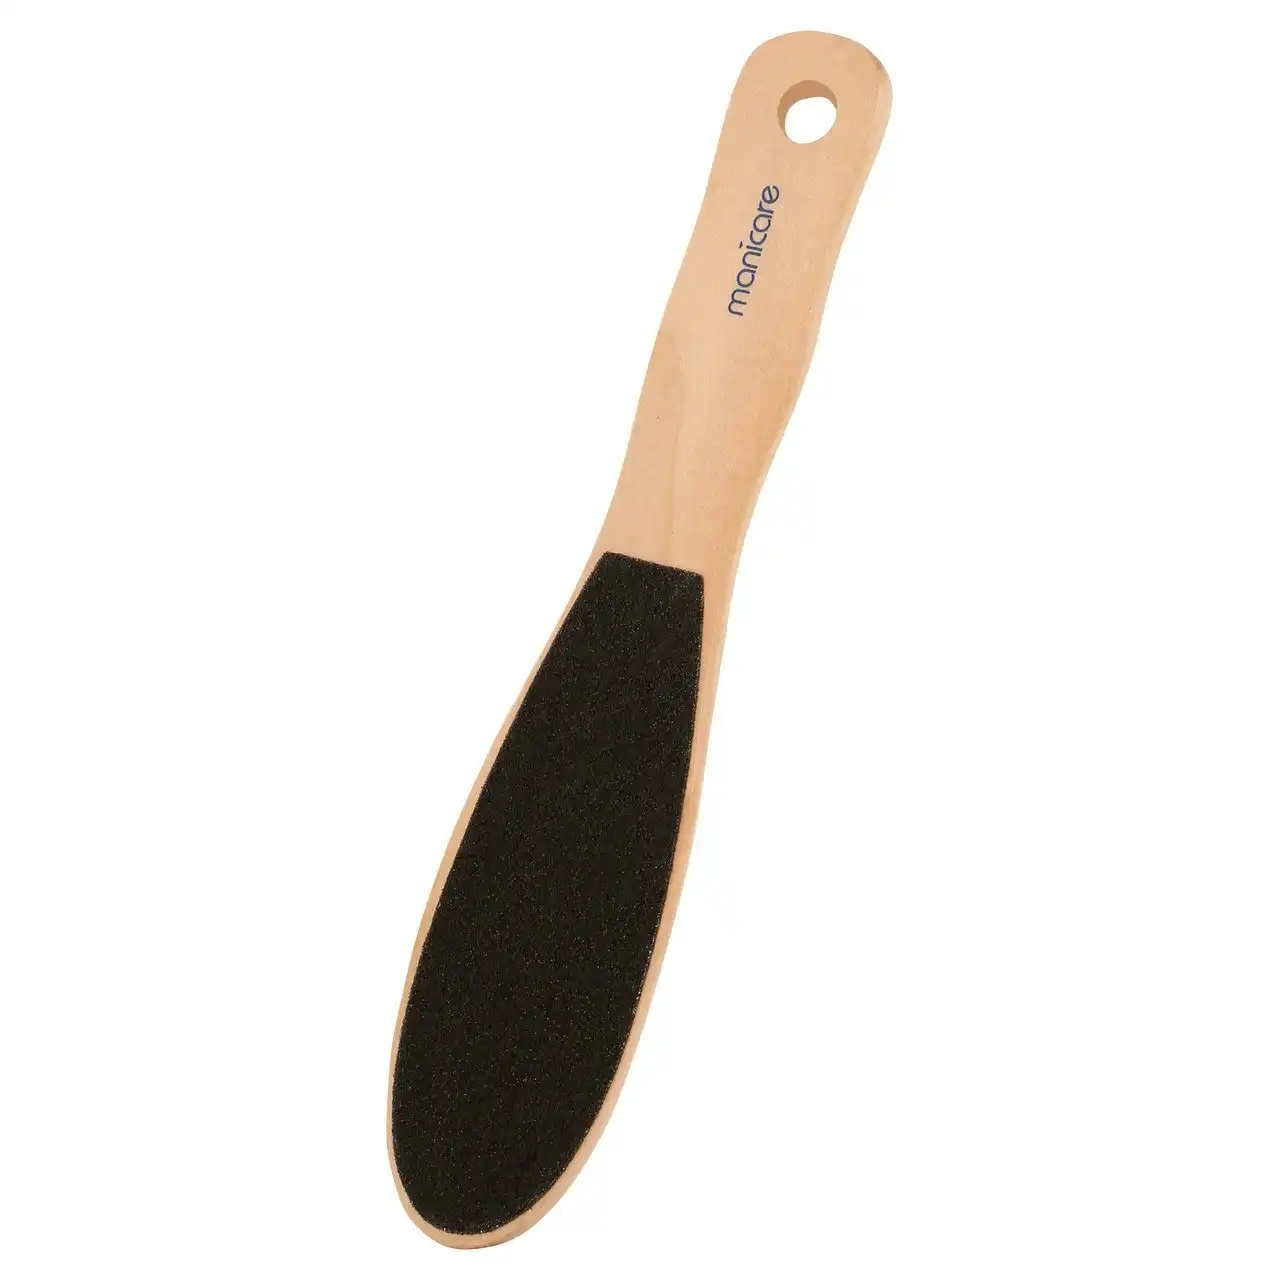 Manicare Foot File, Wooden